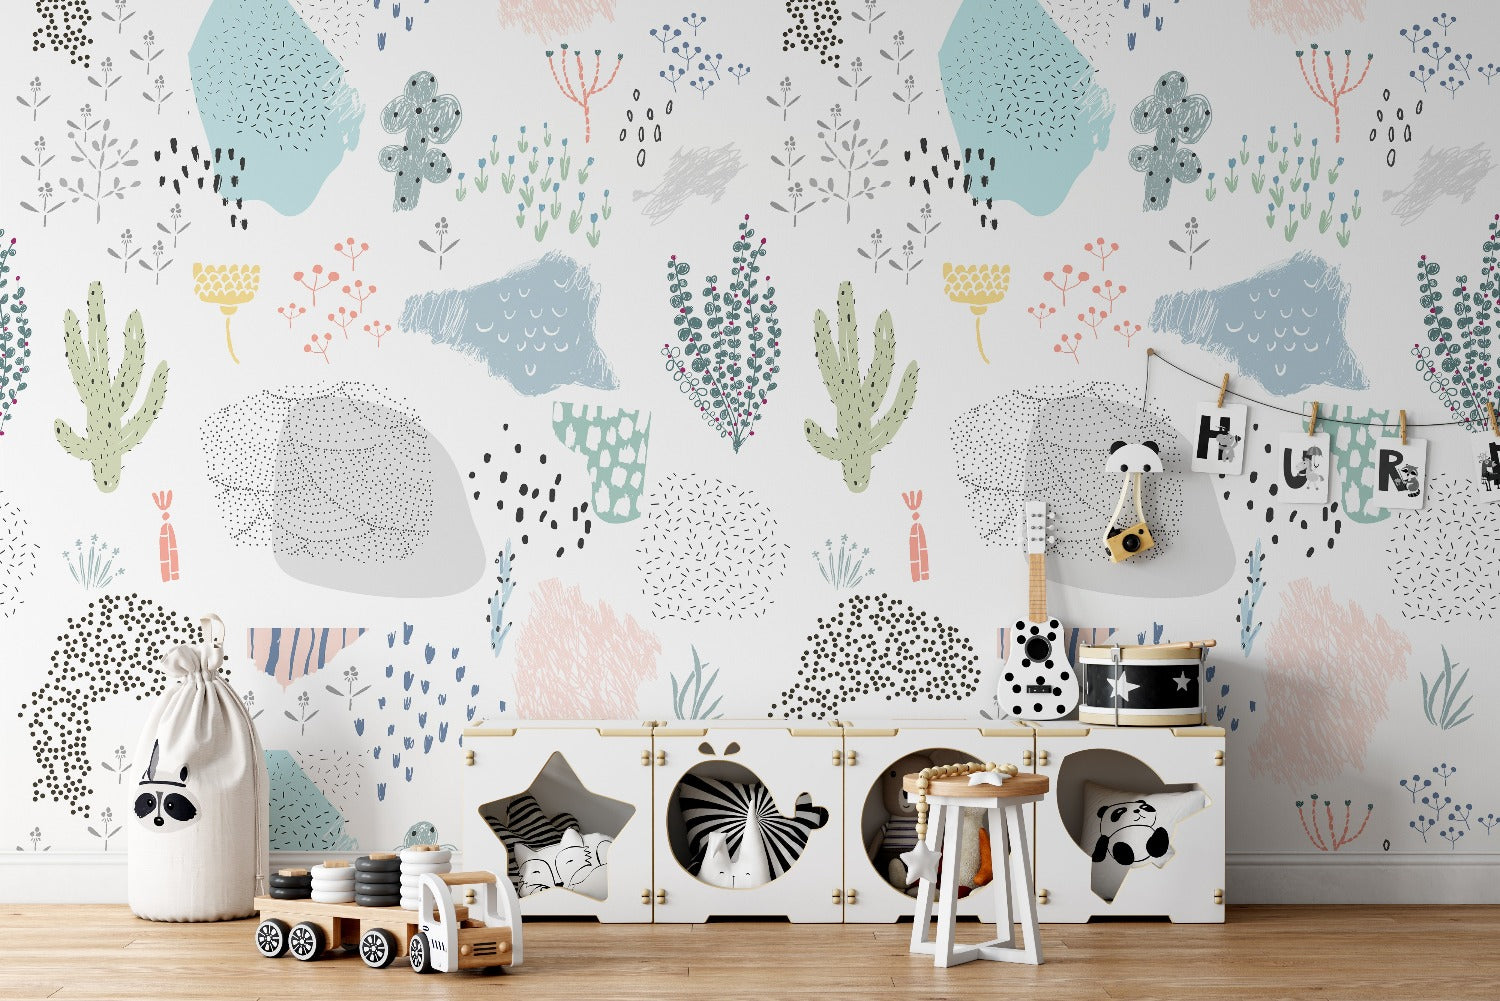 Children's room decorated with Kids Wallpaper - Doodles, showcasing playful doodles of plants, cacti, and abstract shapes in soft pastel colors on a white background.